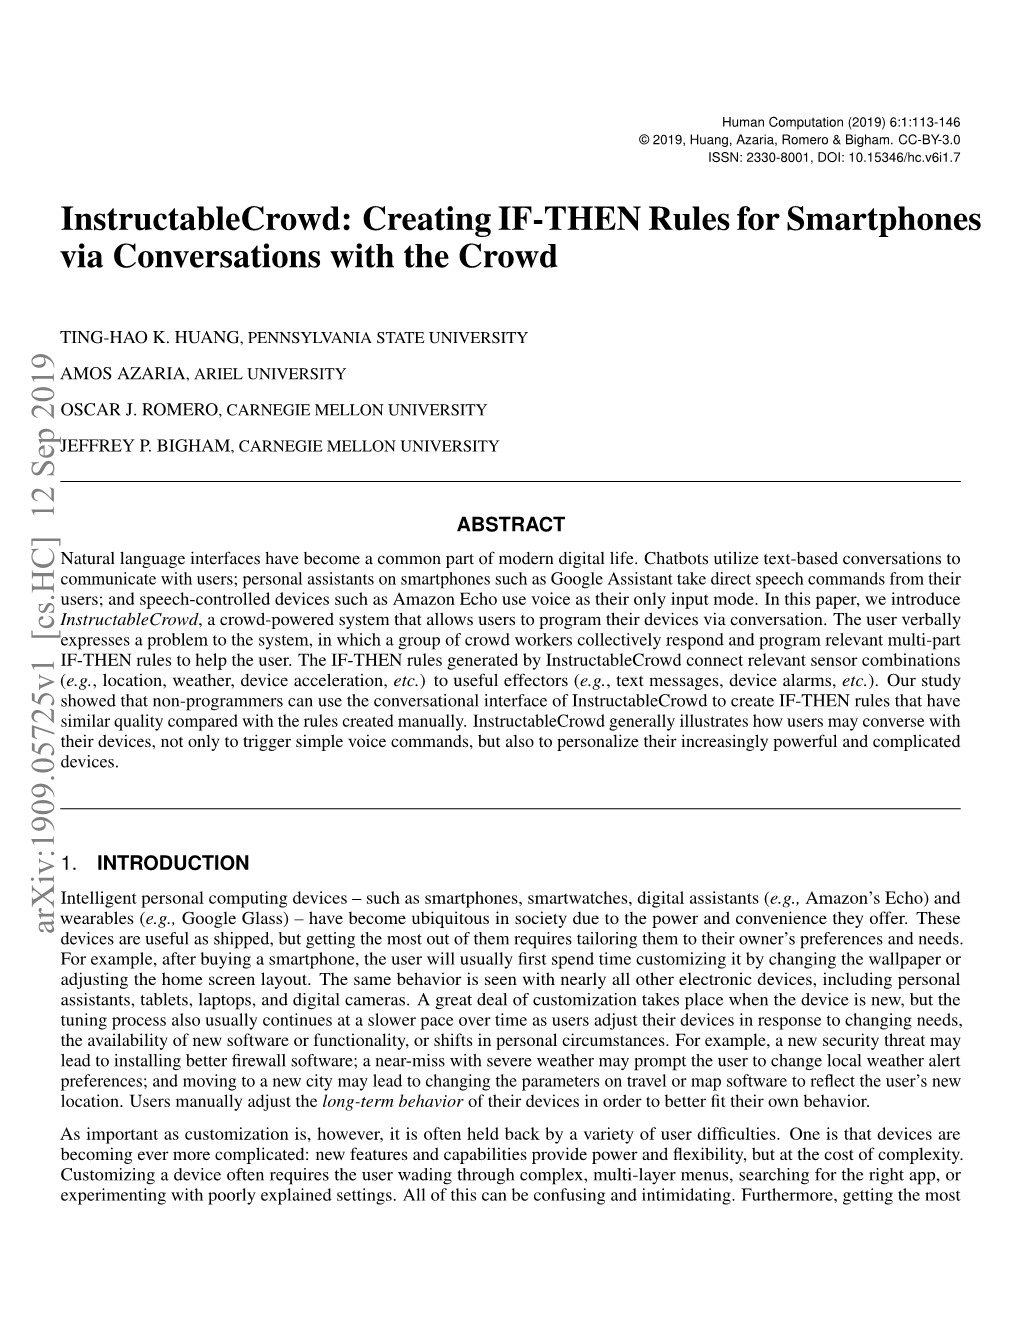 Instructablecrowd: Creating IF-THEN Rules for Smartphones Via Conversations with the Crowd